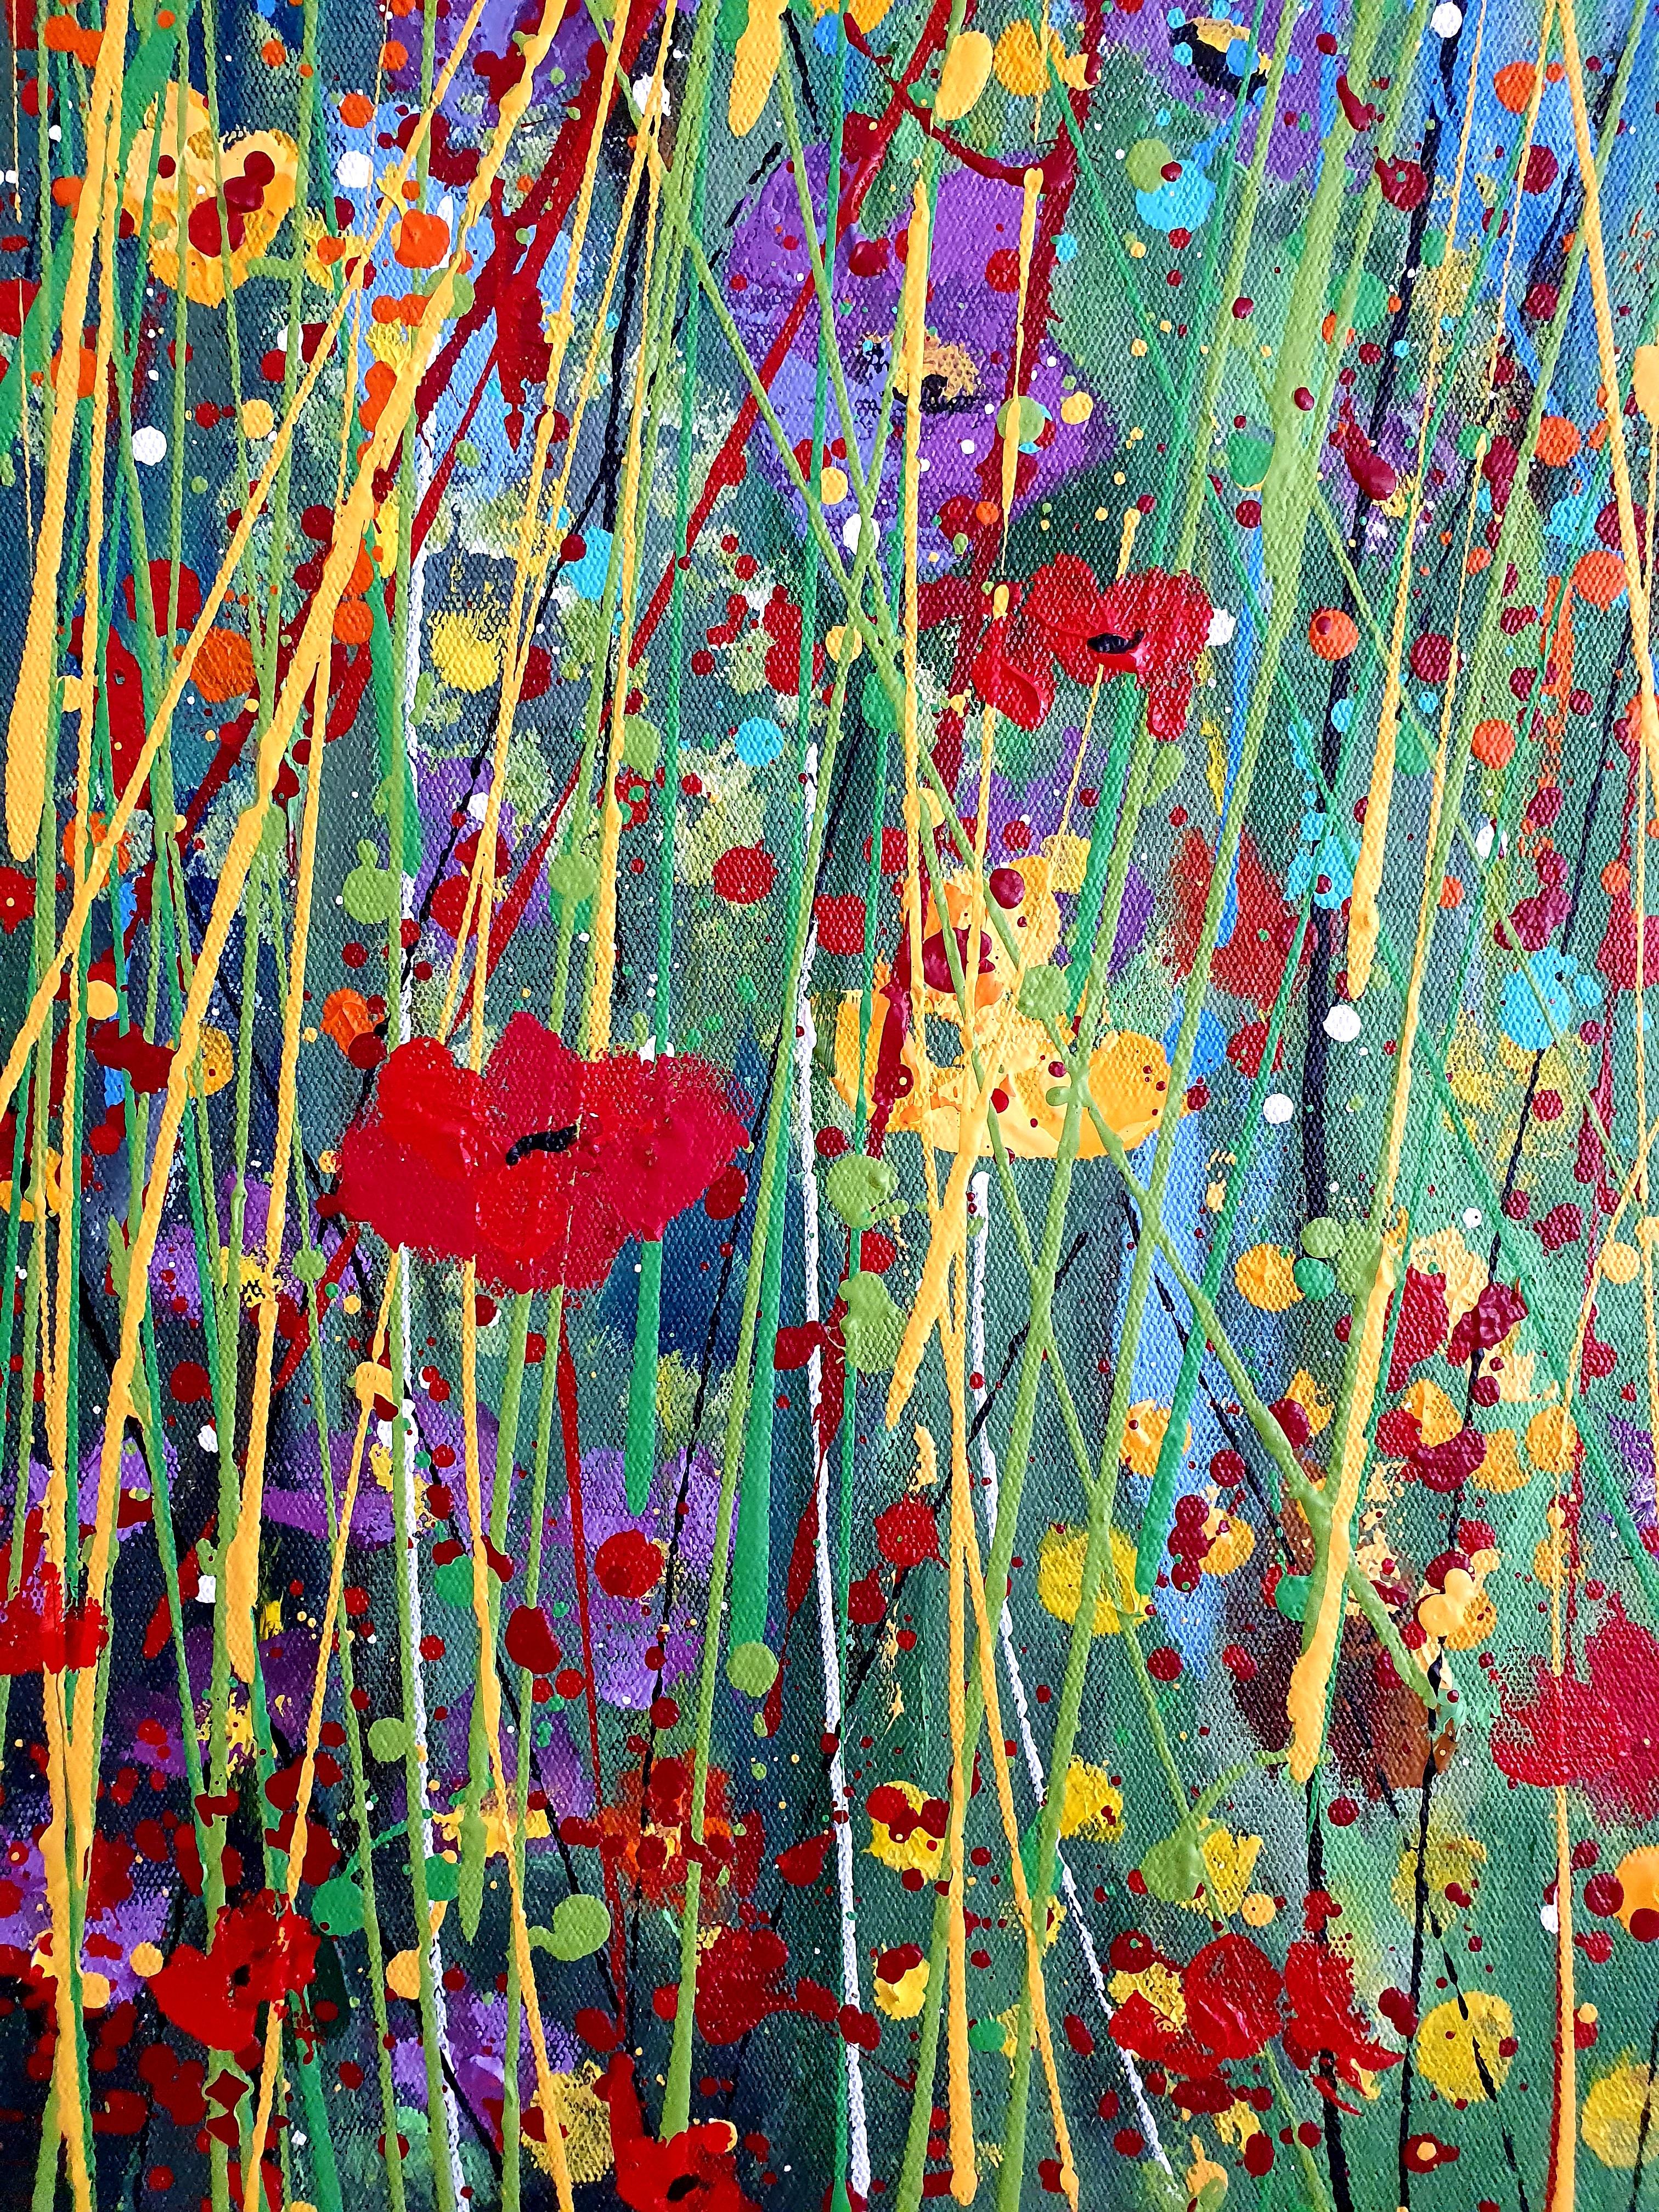 Enchanted - Quietude - Floral Color Joy Meadow Flowers Stillness Peace Flowers - Abstract Expressionist Painting by Karnish Art